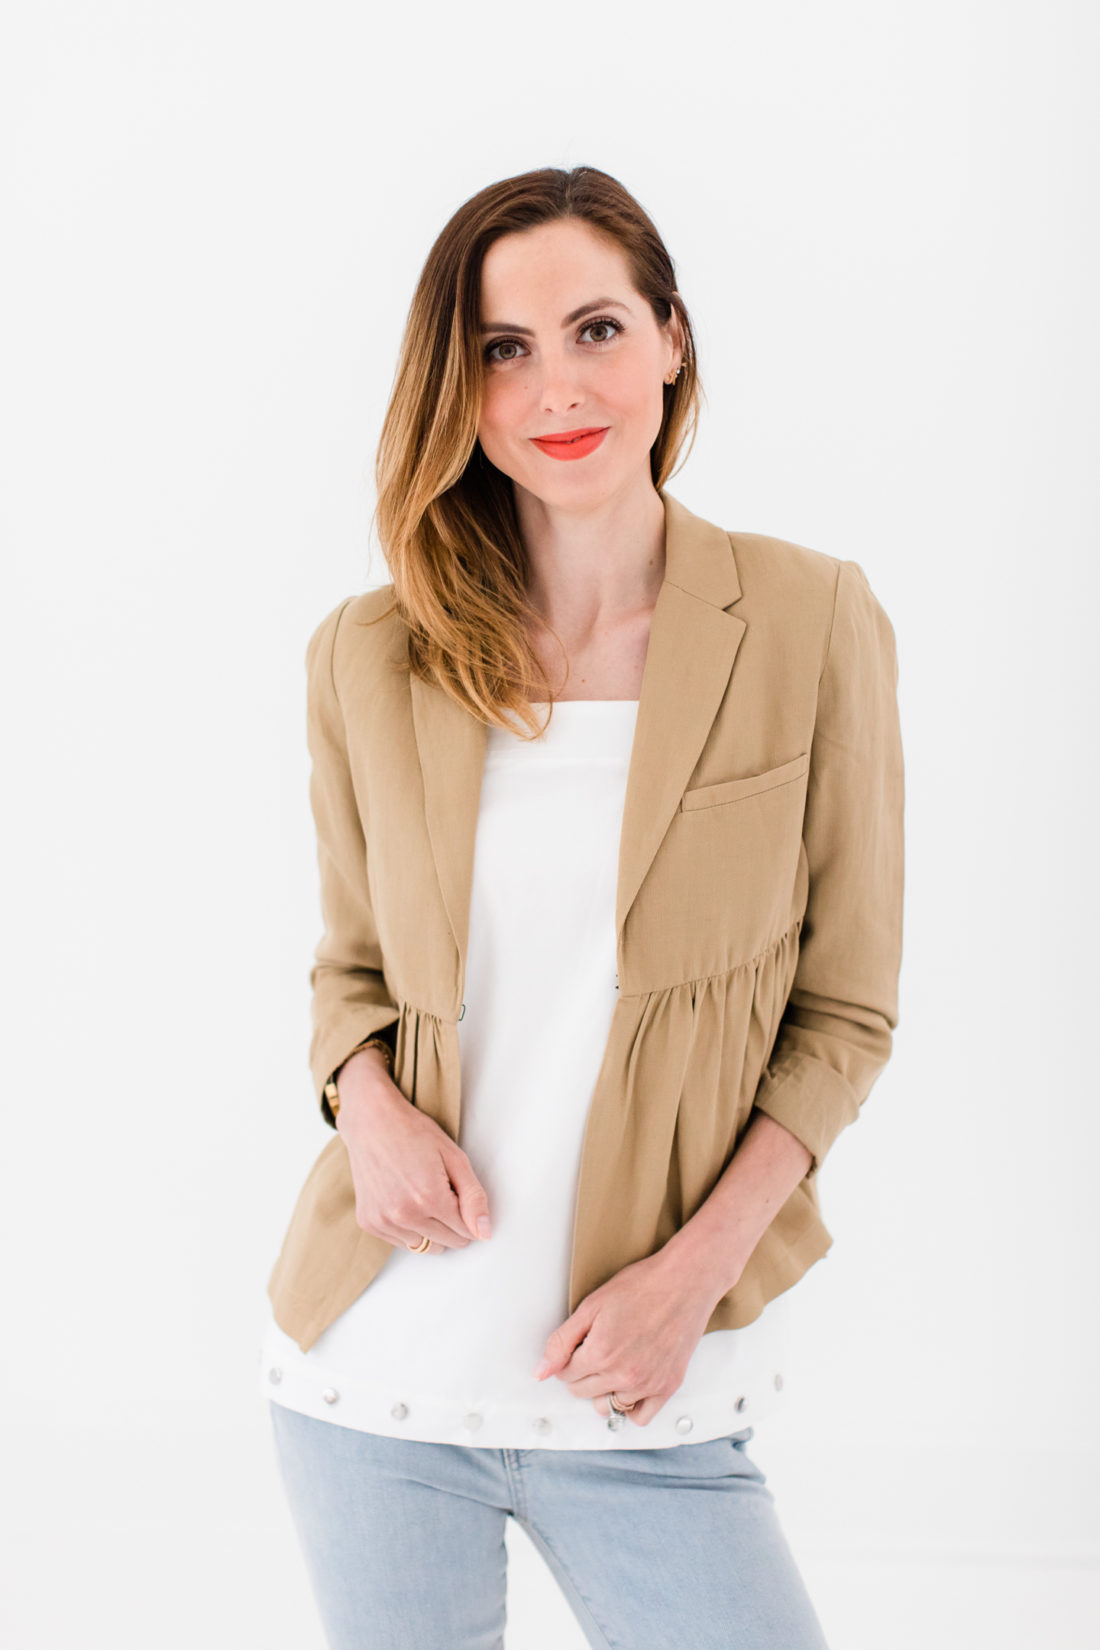 Eva Amurri Martino wears a white bow top, camel ruffle jacket, and jeans as part of a post about packing simply